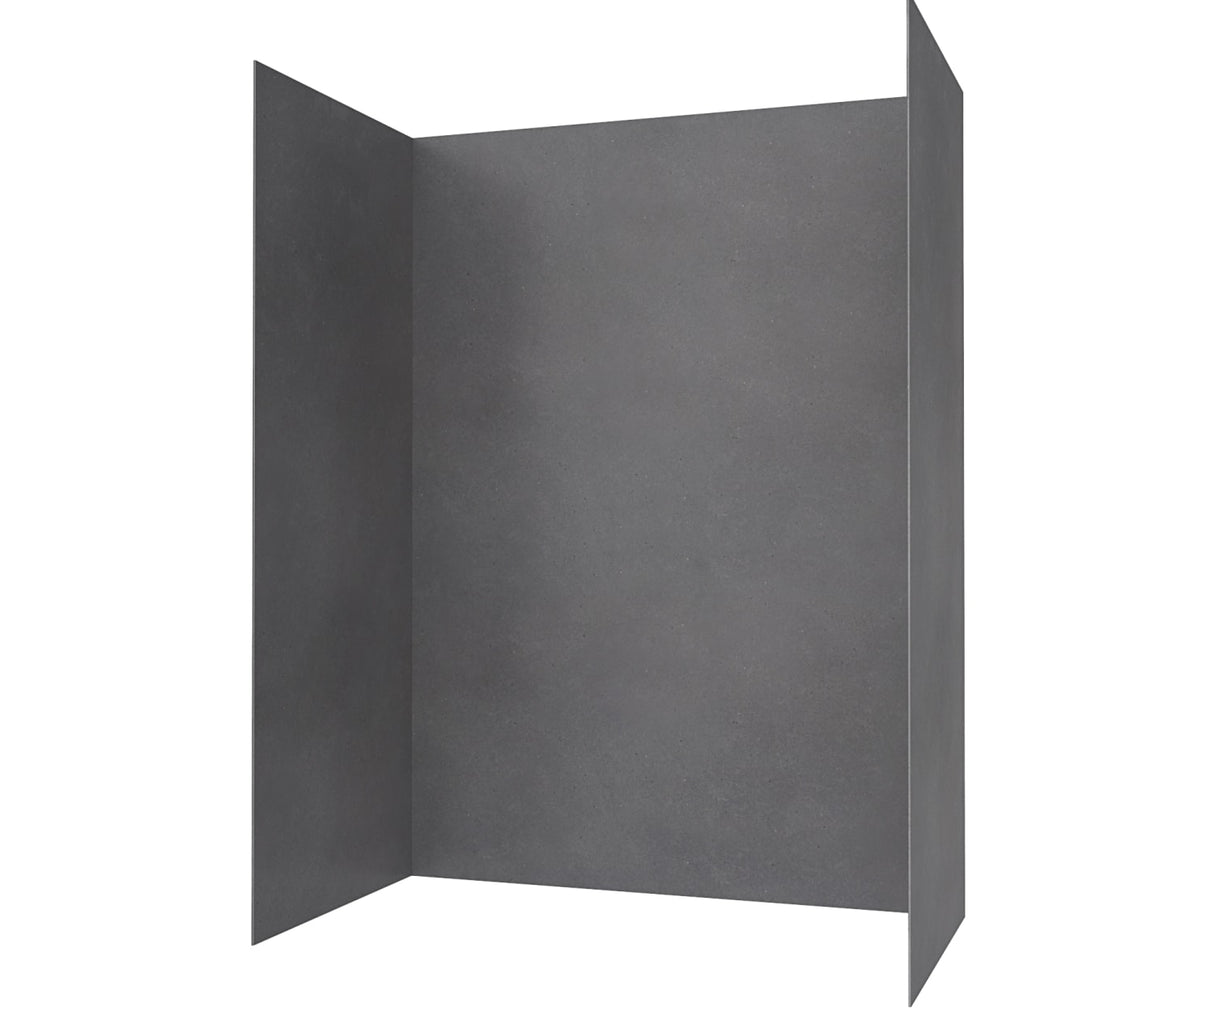 Swanstone SMMK84-3062 30 x 62 x 84 Swanstone Smooth Tile Glue up Tub Wall Kit in Charcoal Gray SMMK843062.209